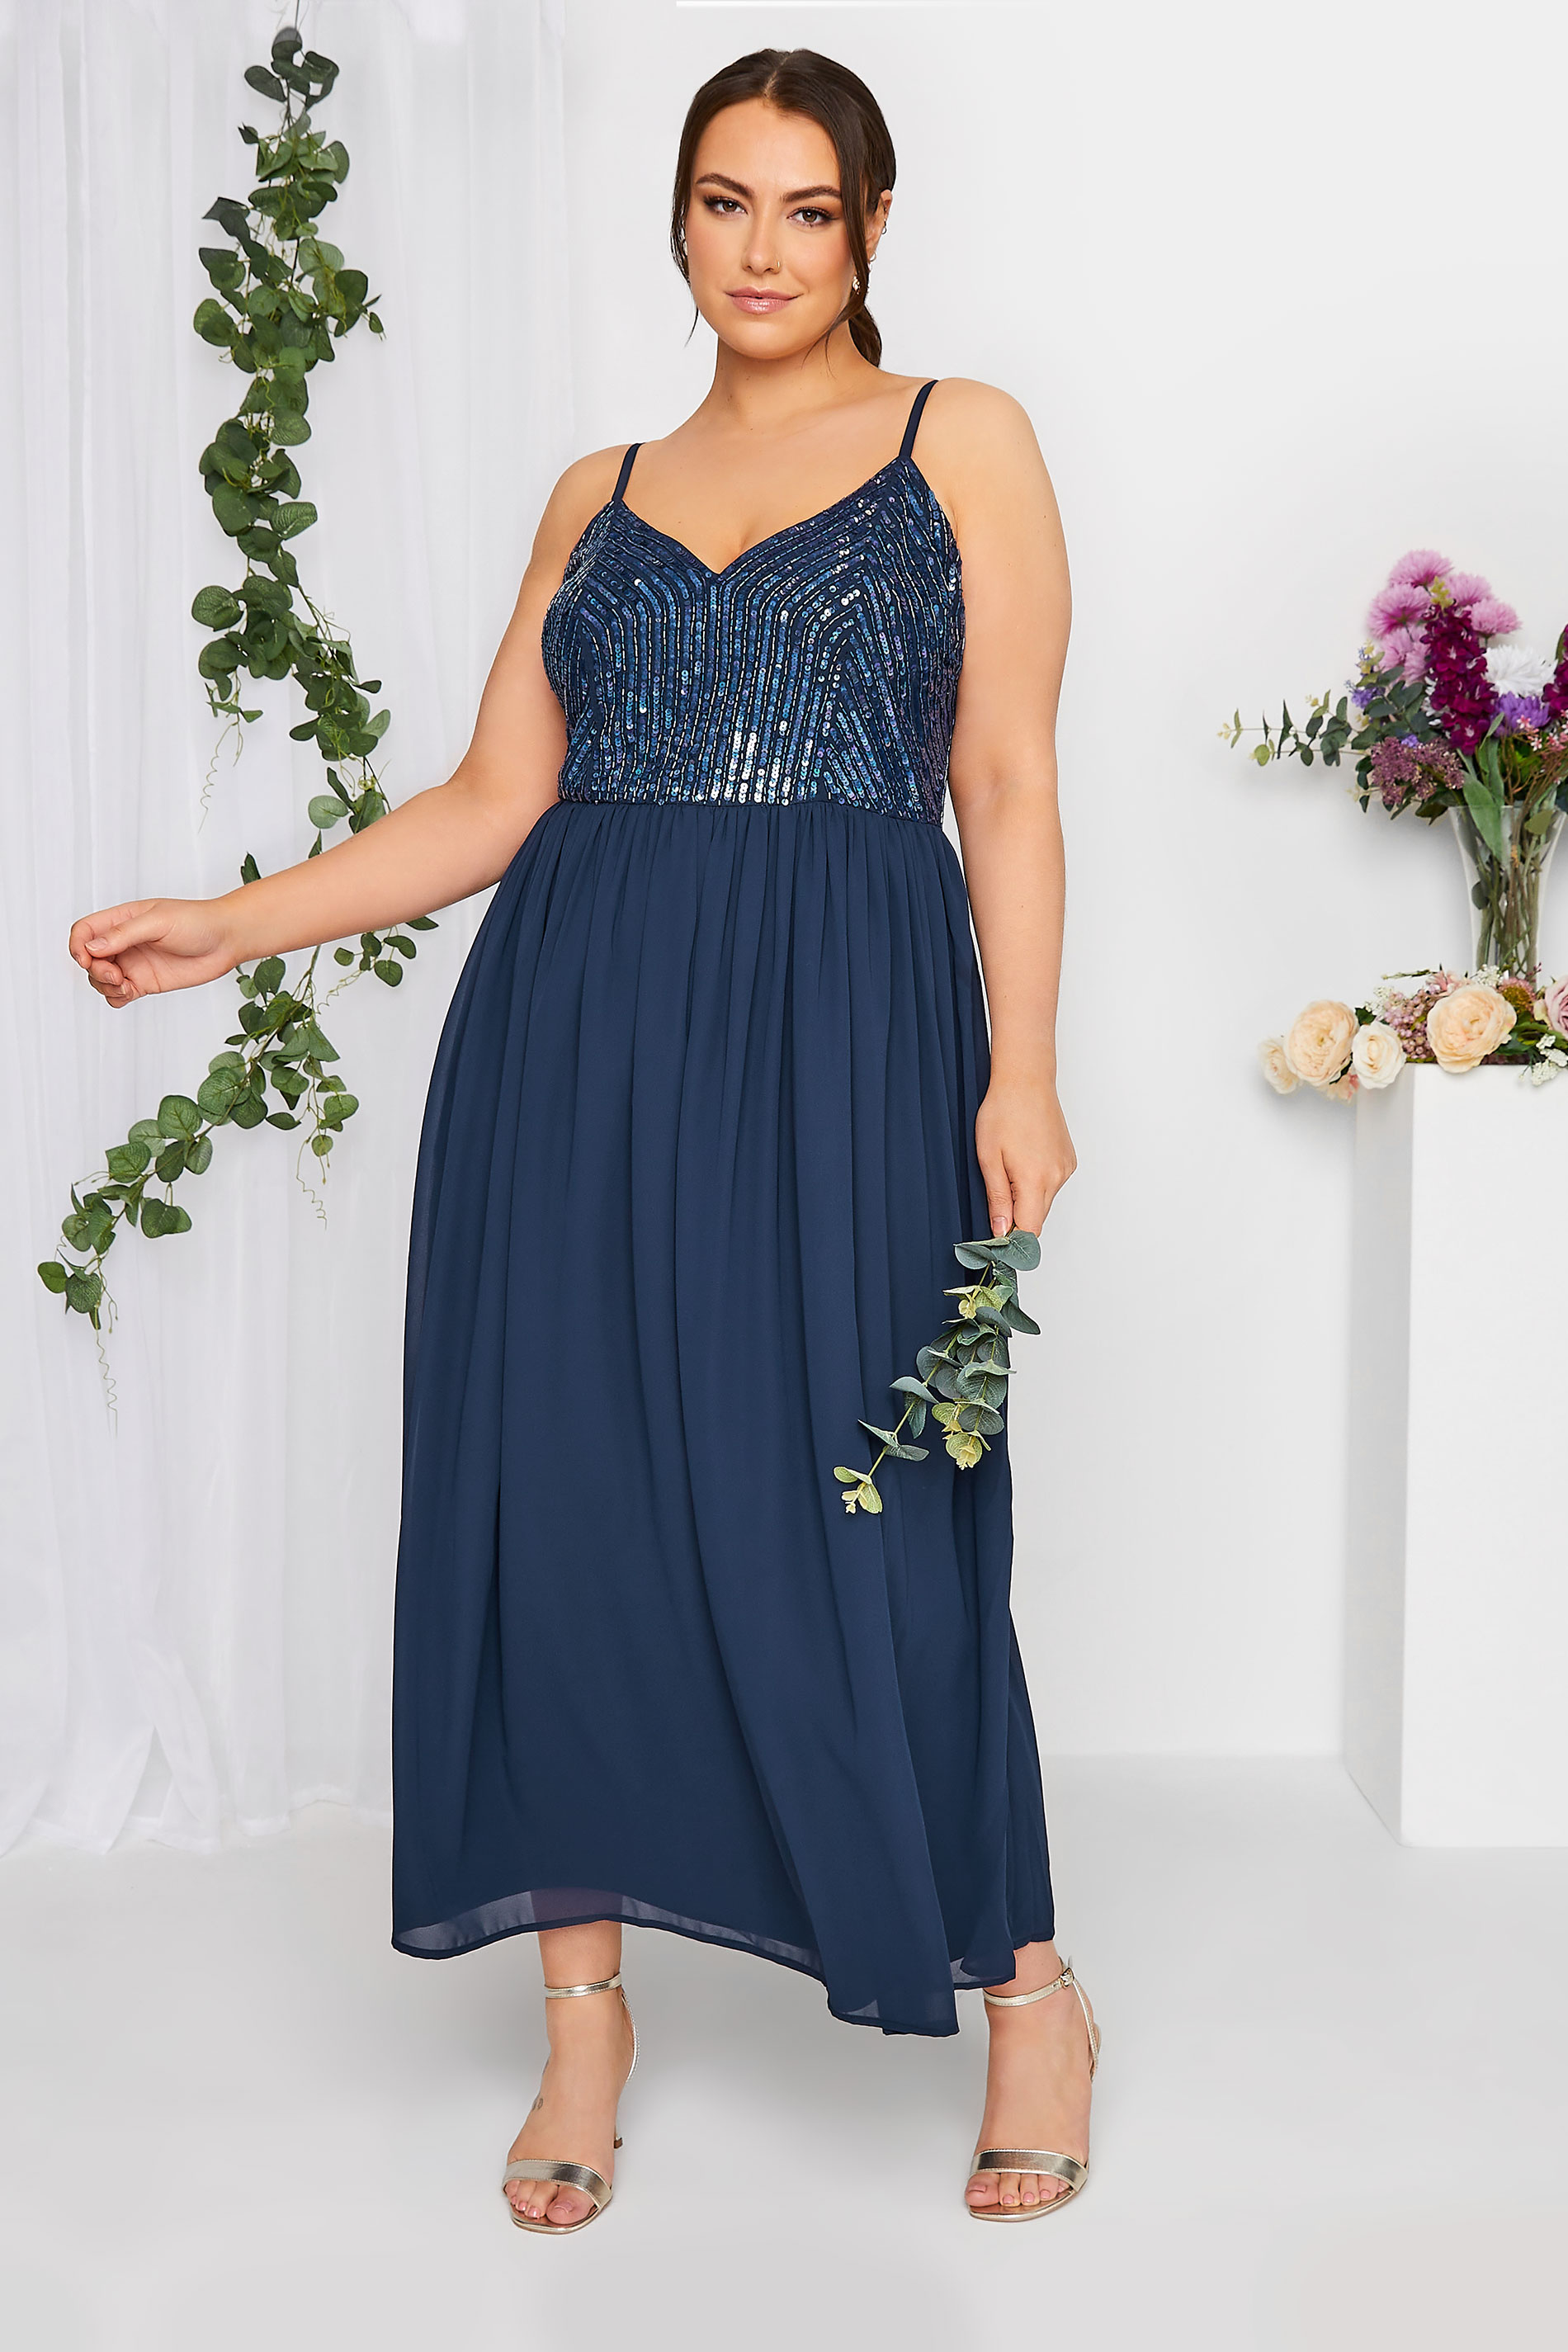 LUXE Plus Size Navy Blue Sequin Embellished Sleeveless Maxi Dress | Yours Clothing 2